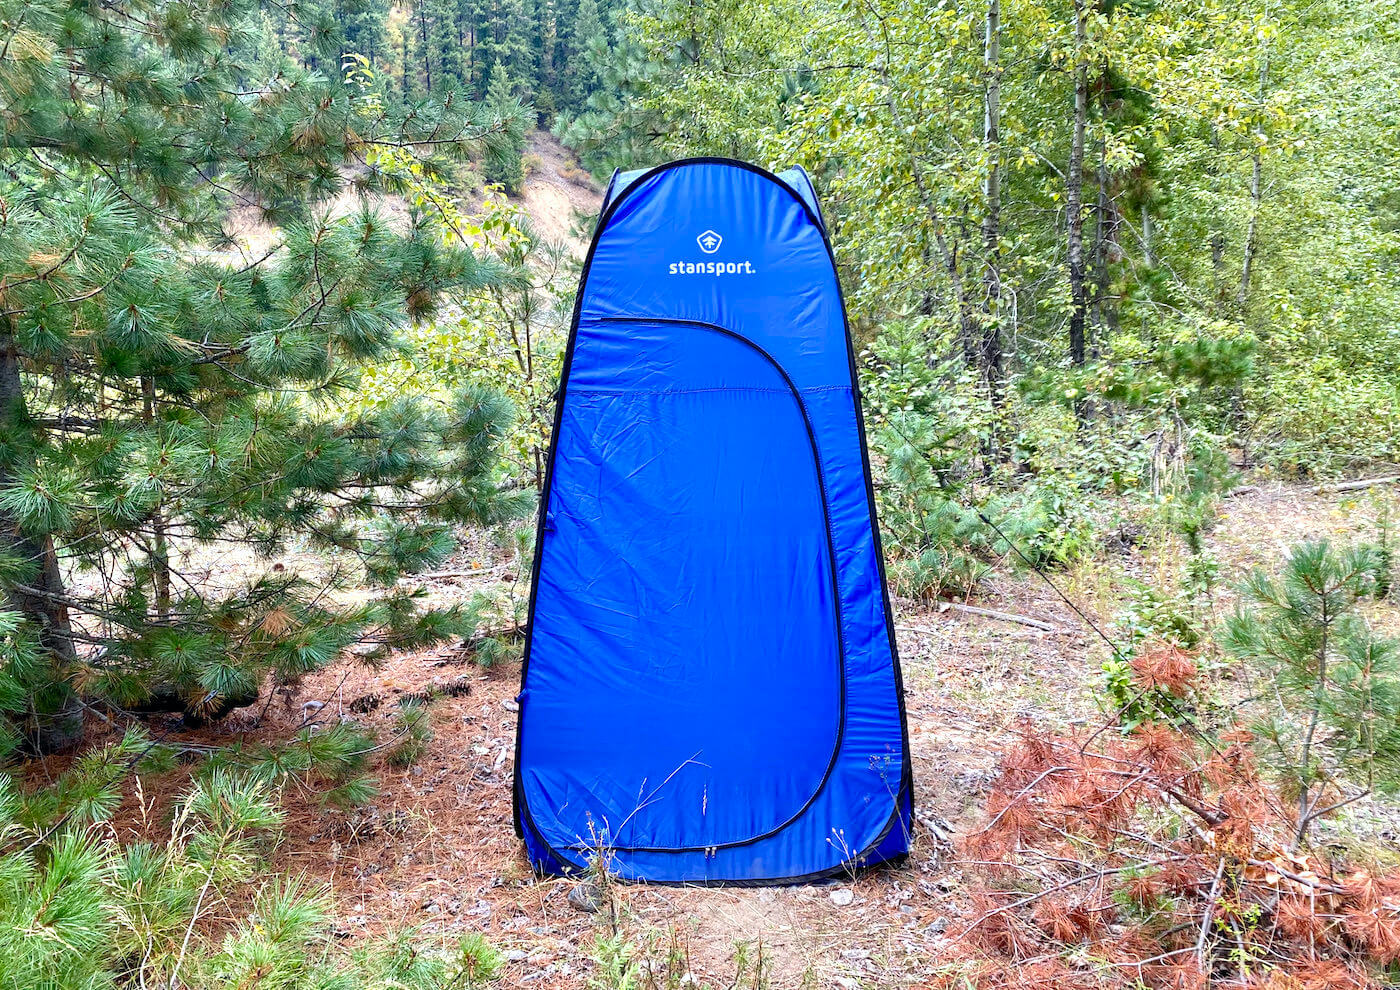 This review photo shows the Stansport Pop-Up Privacy Shelter set up at a remote campsite during the testing process.